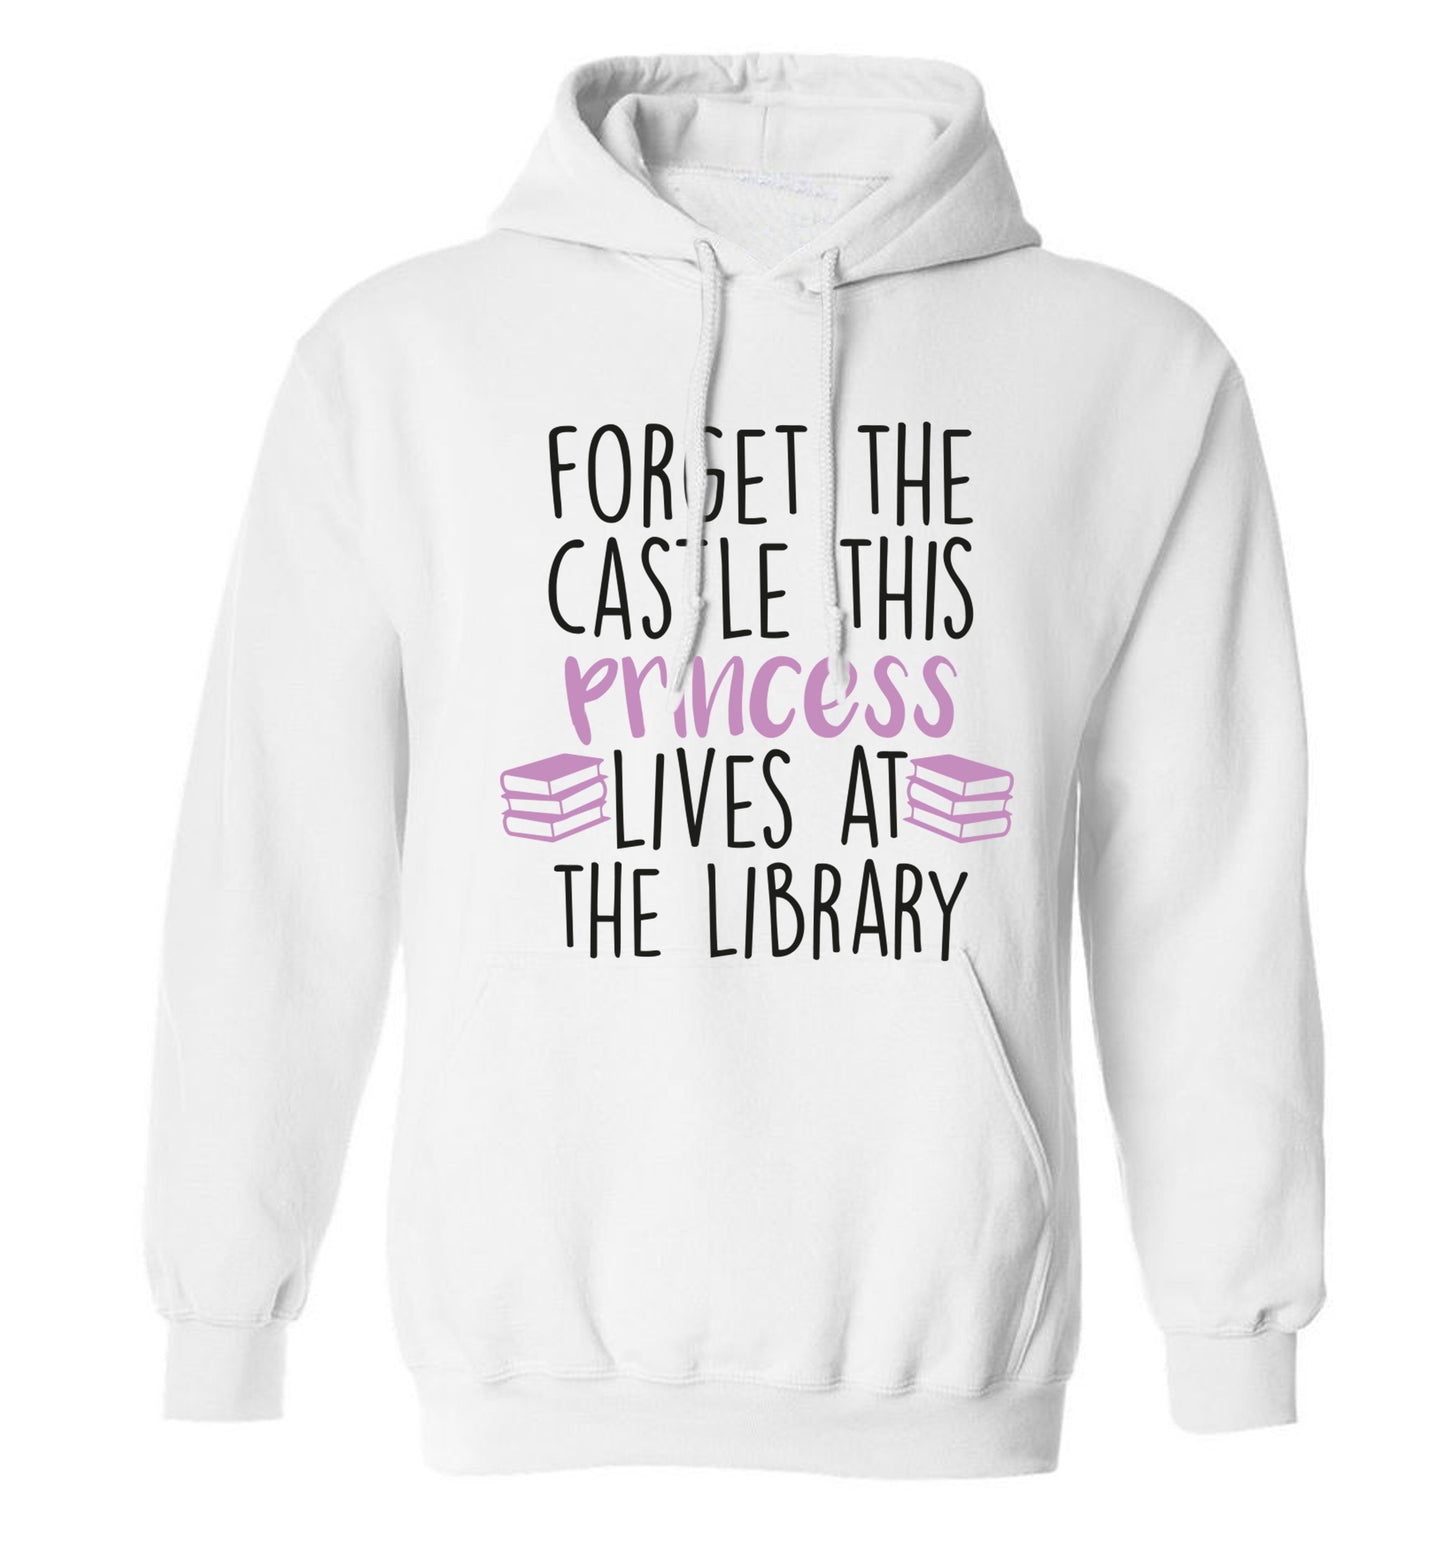 Forget the castle this princess lives at the library adults unisex white hoodie 2XL